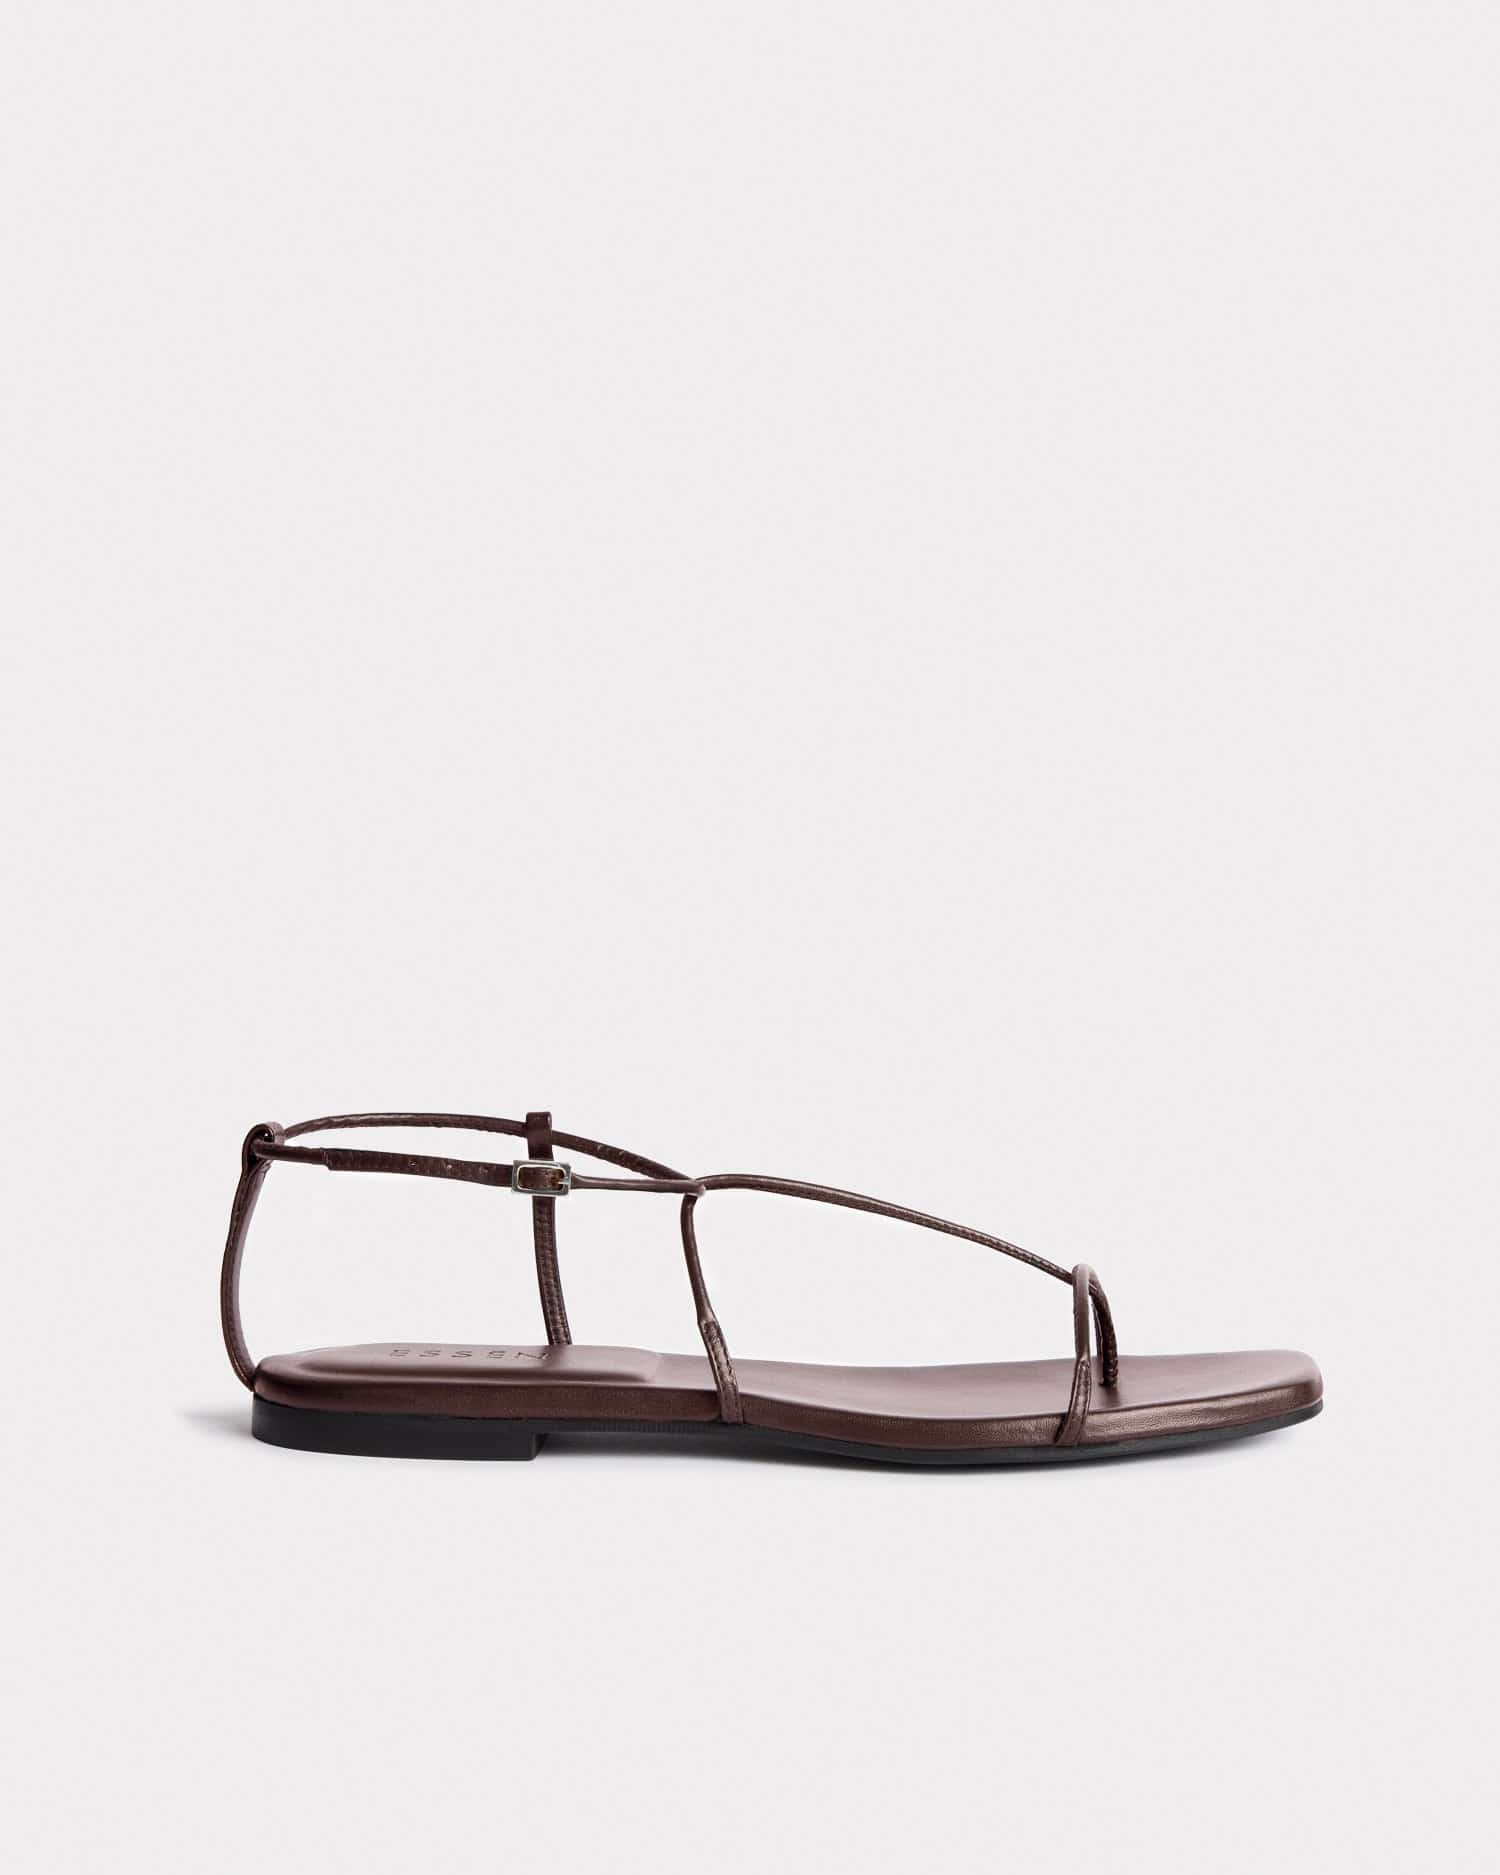 The Row inspired sandals